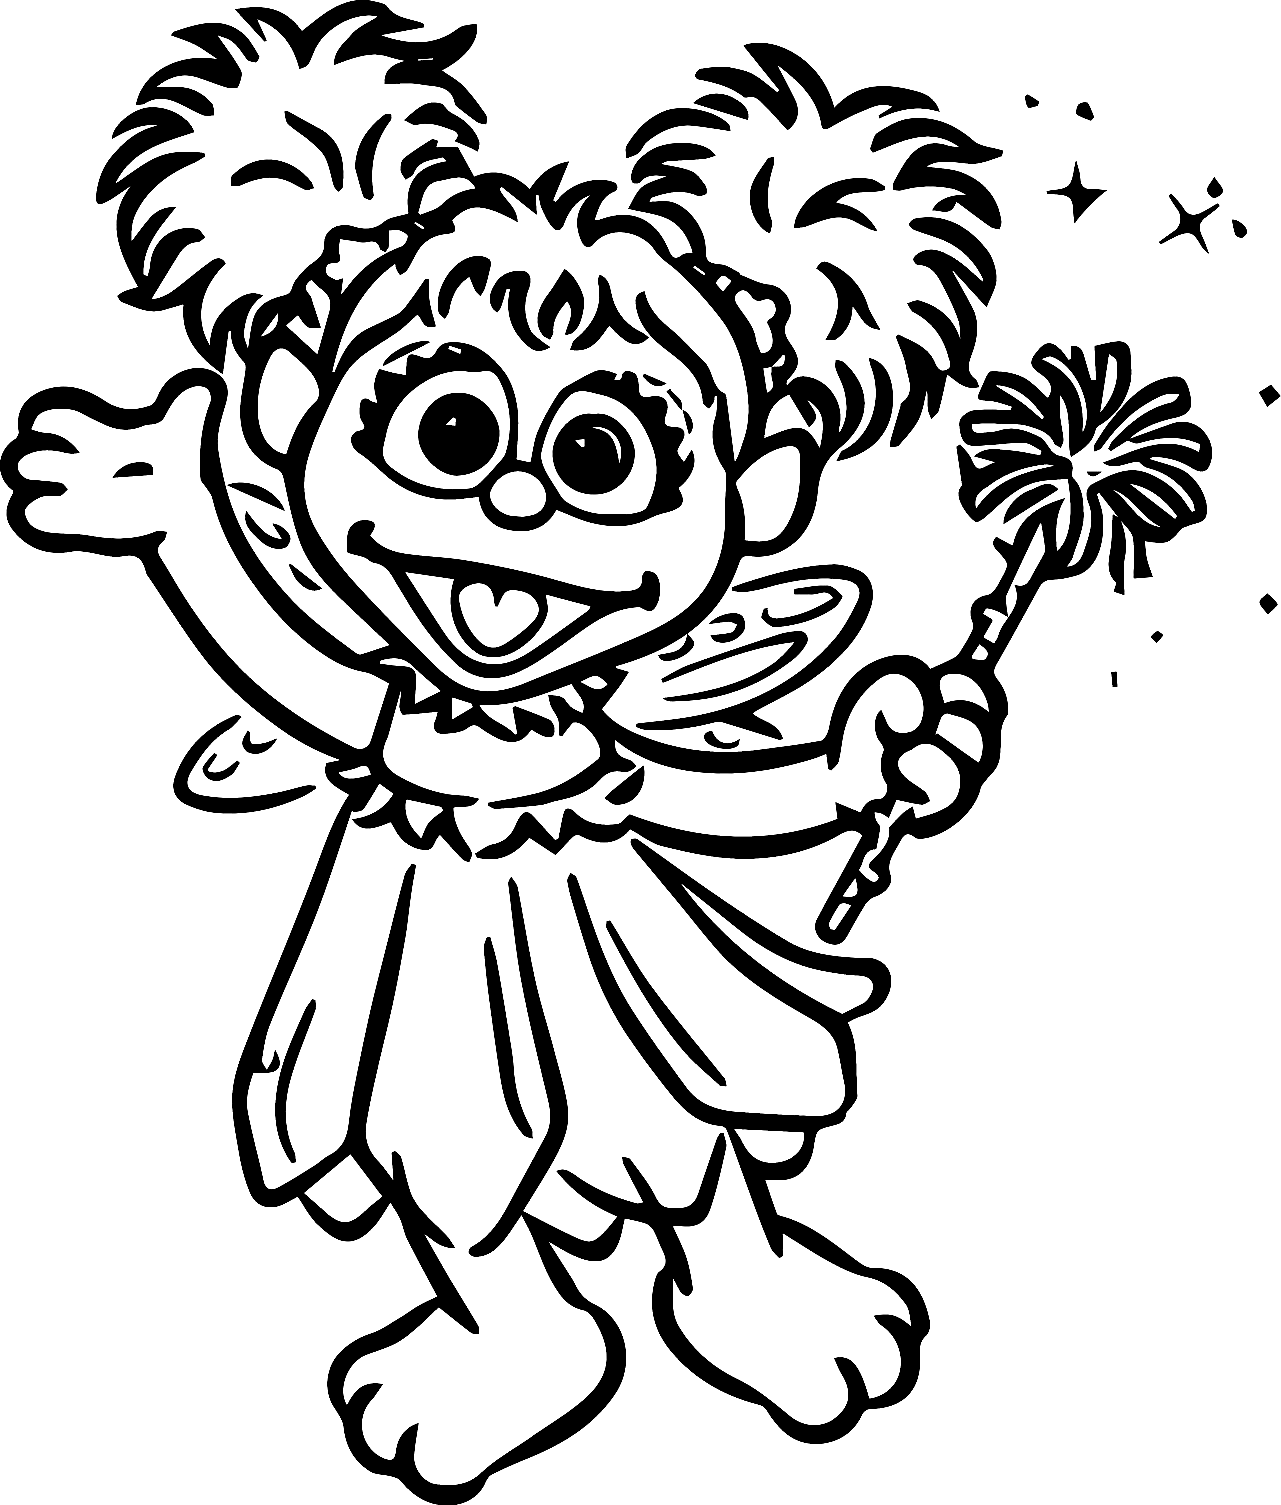 Abby Cadabby Coloring Pages